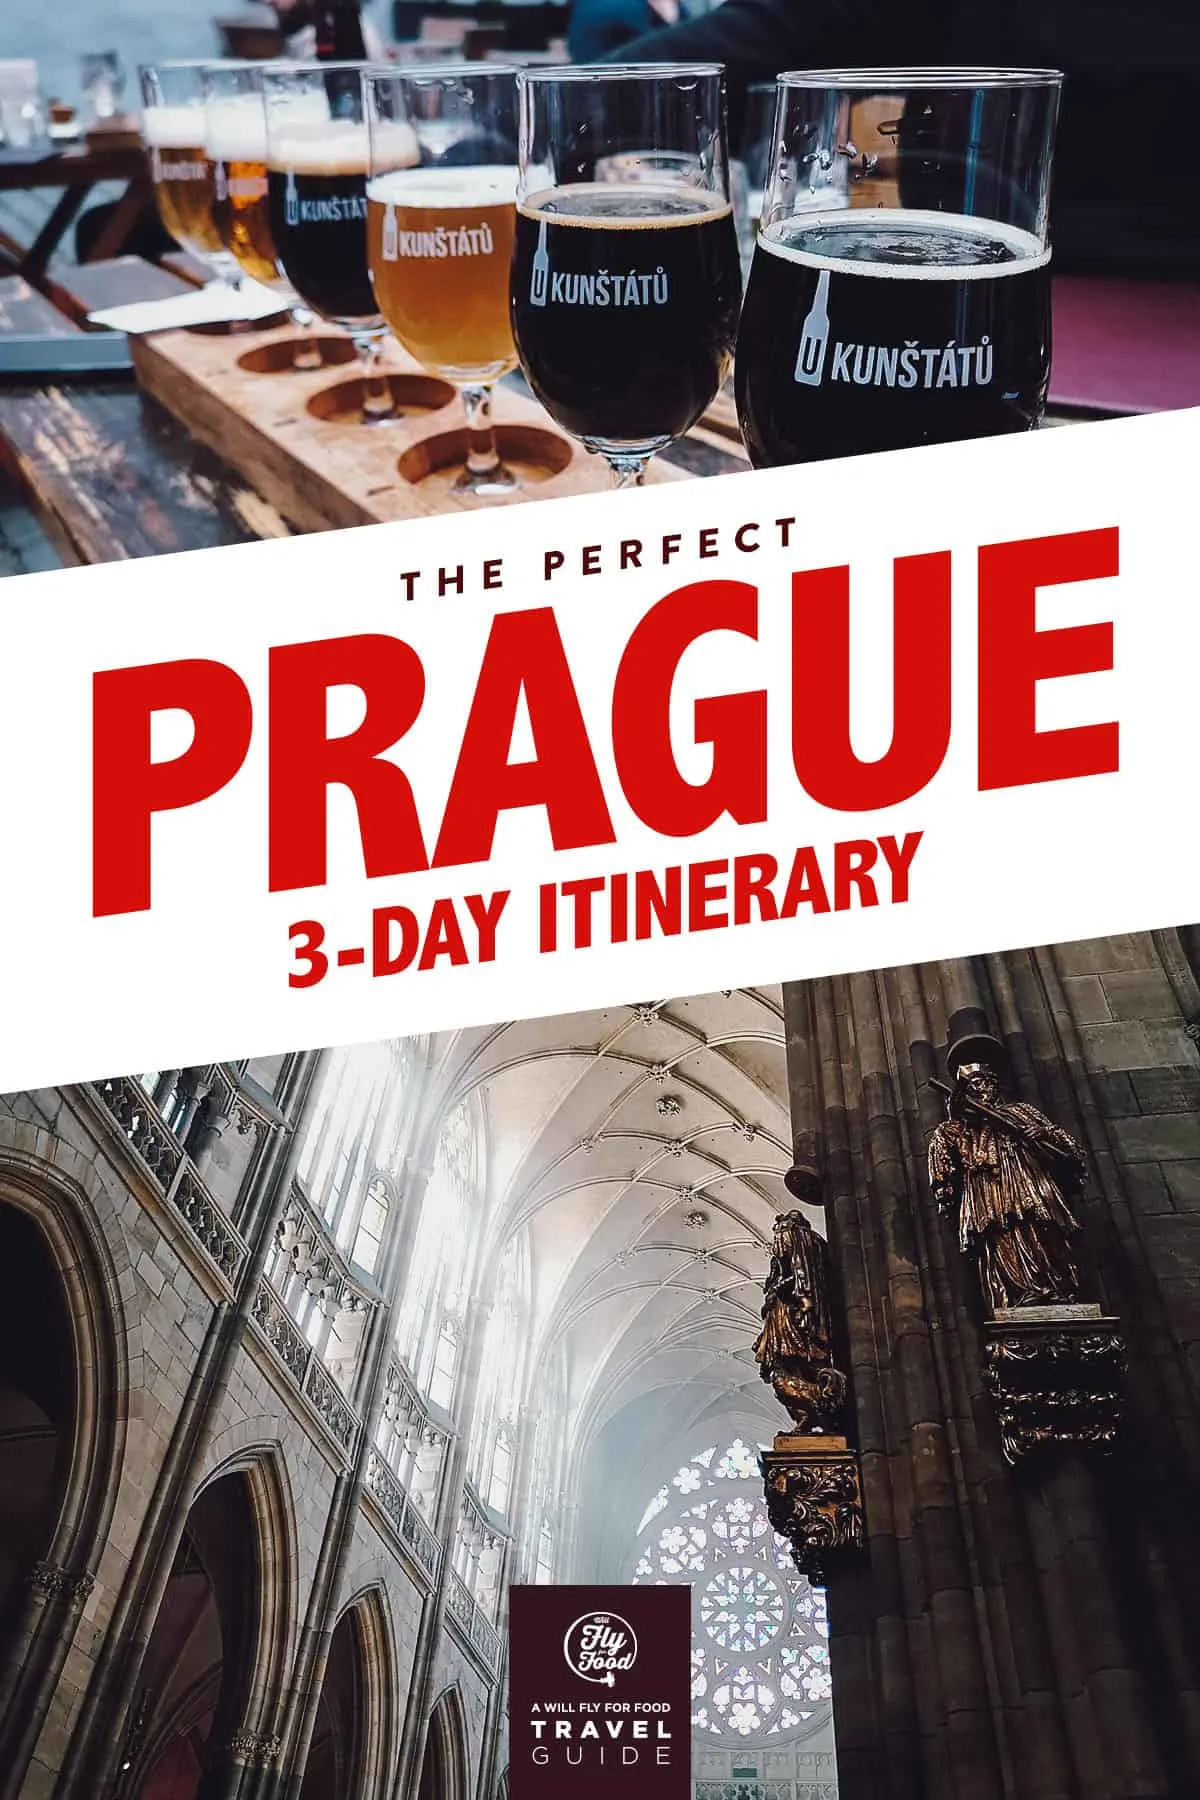 Saint Vitus Cathedral and a flight of beer in Prague